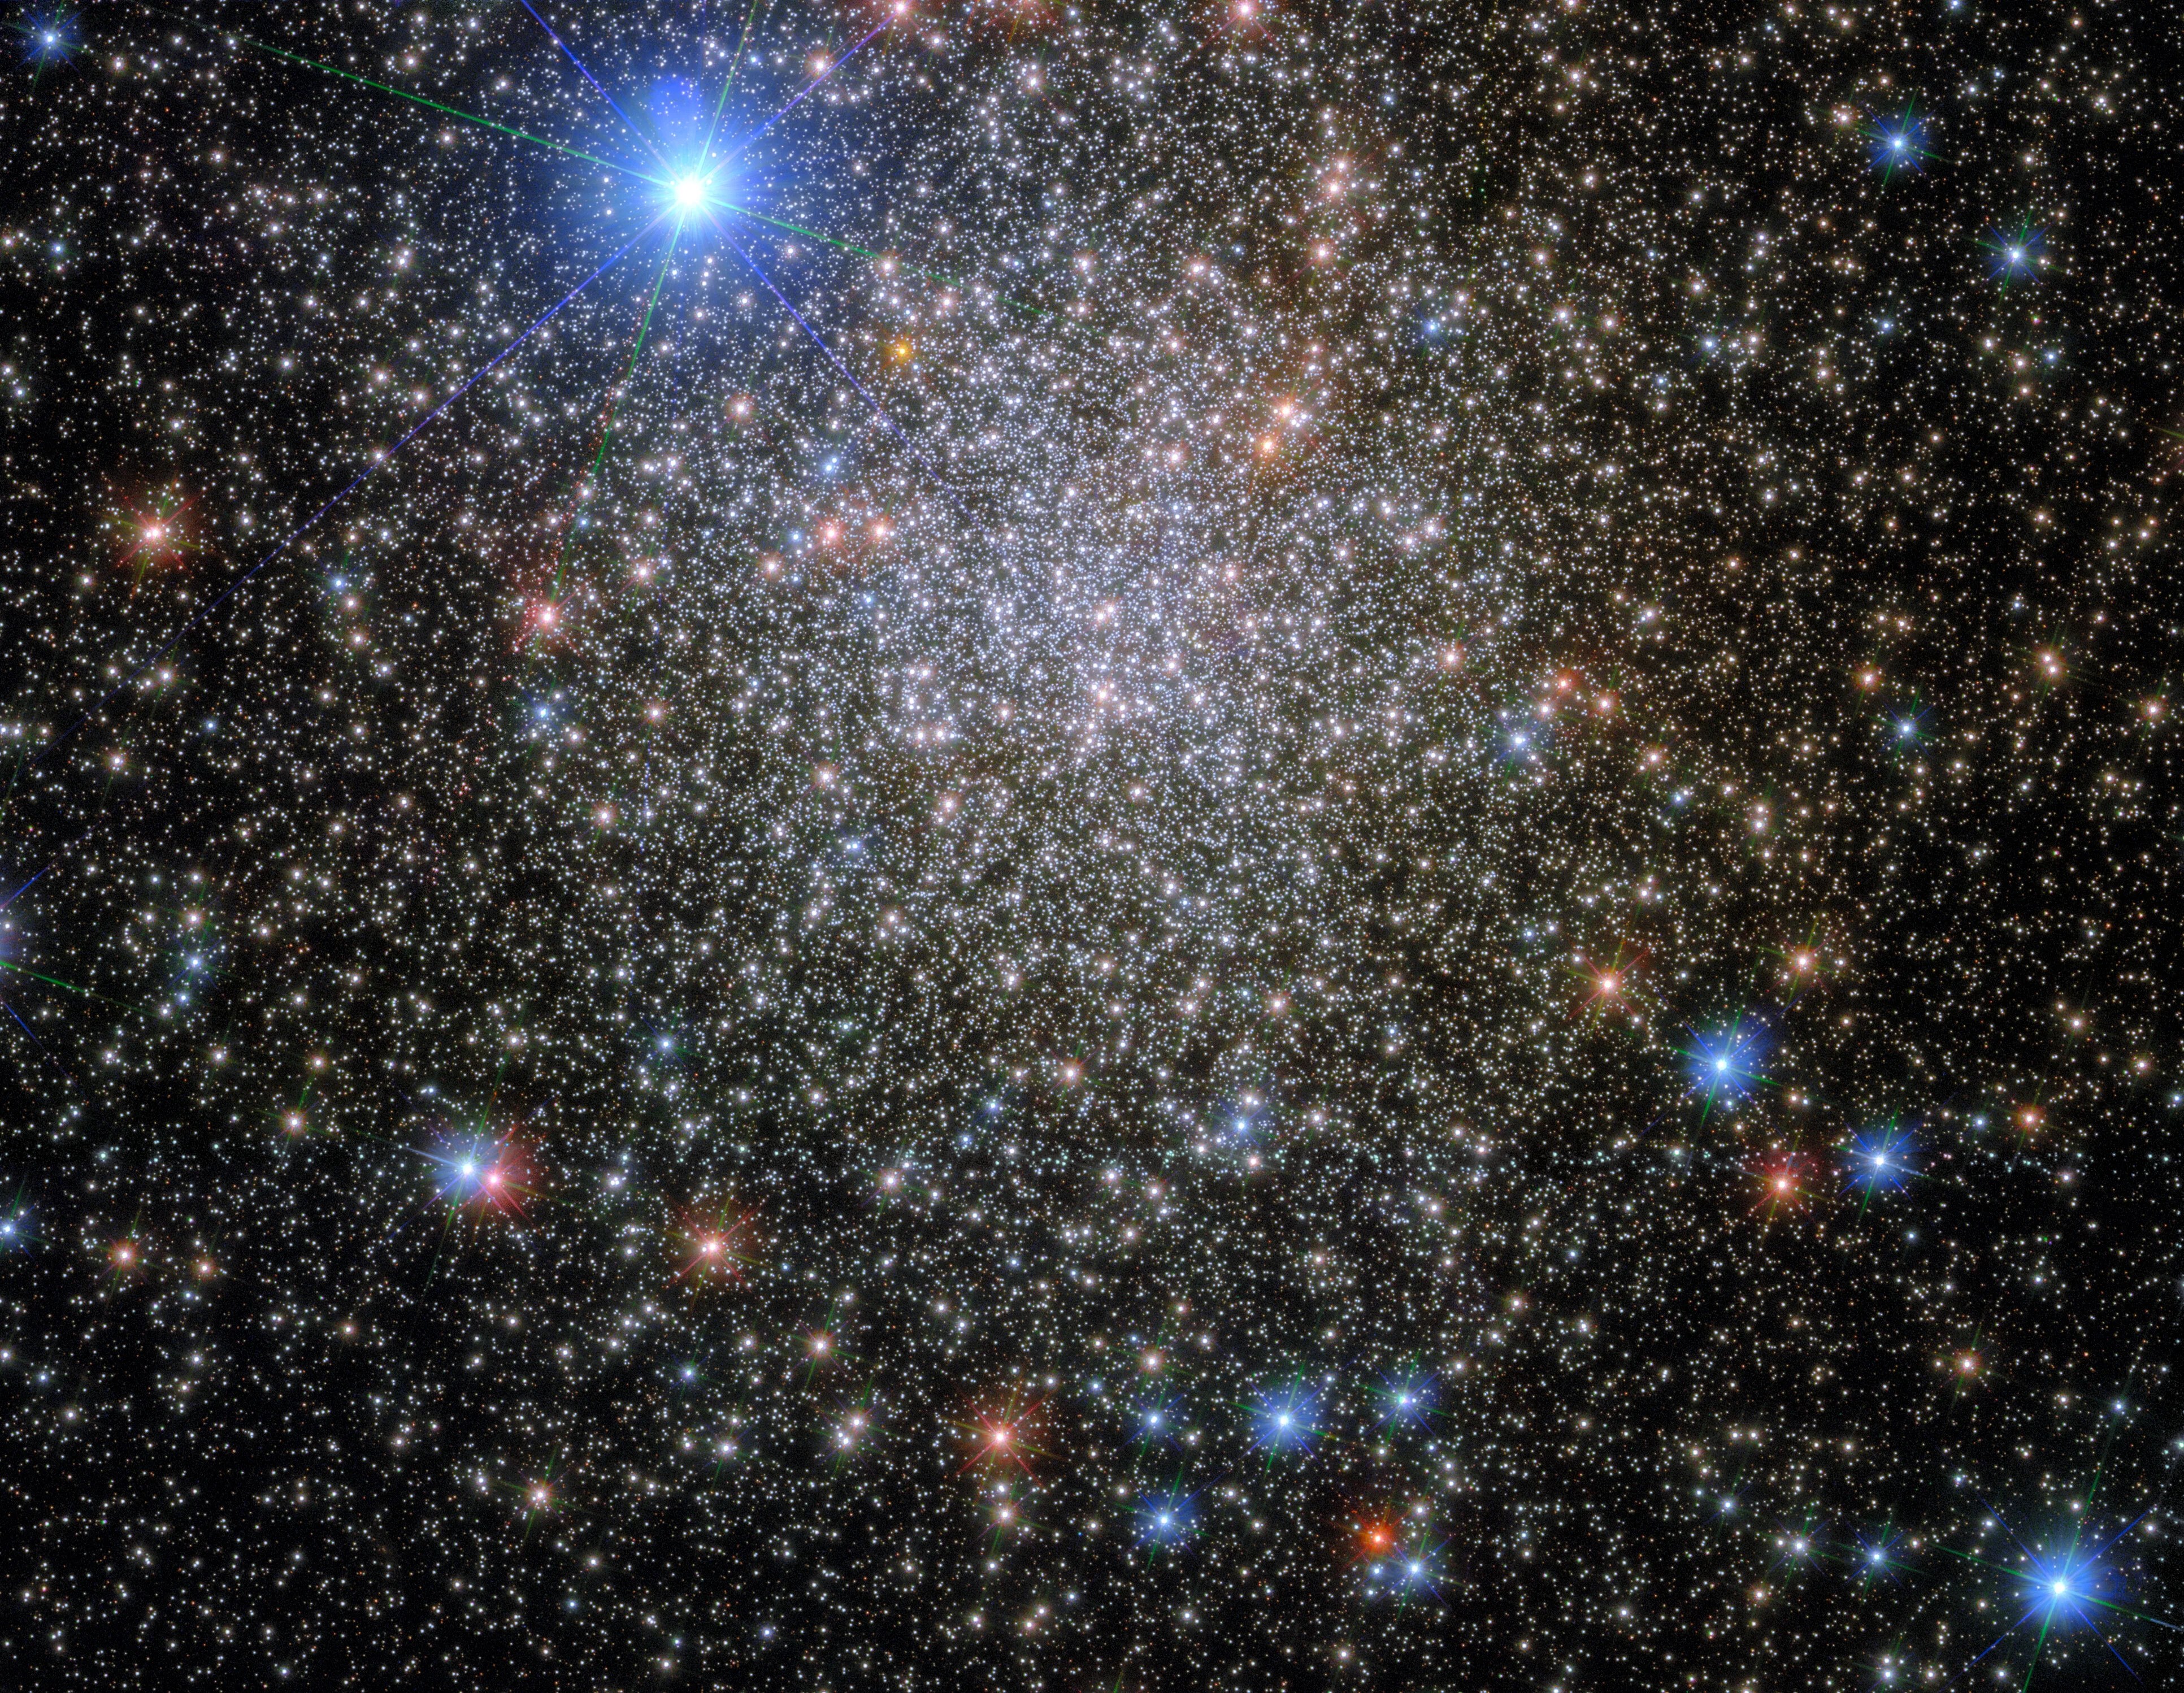 This image shows the globular cluster ngc 6380, which lies around 35,000 light-years from earth, in the constellation scorpio (the scorpion).